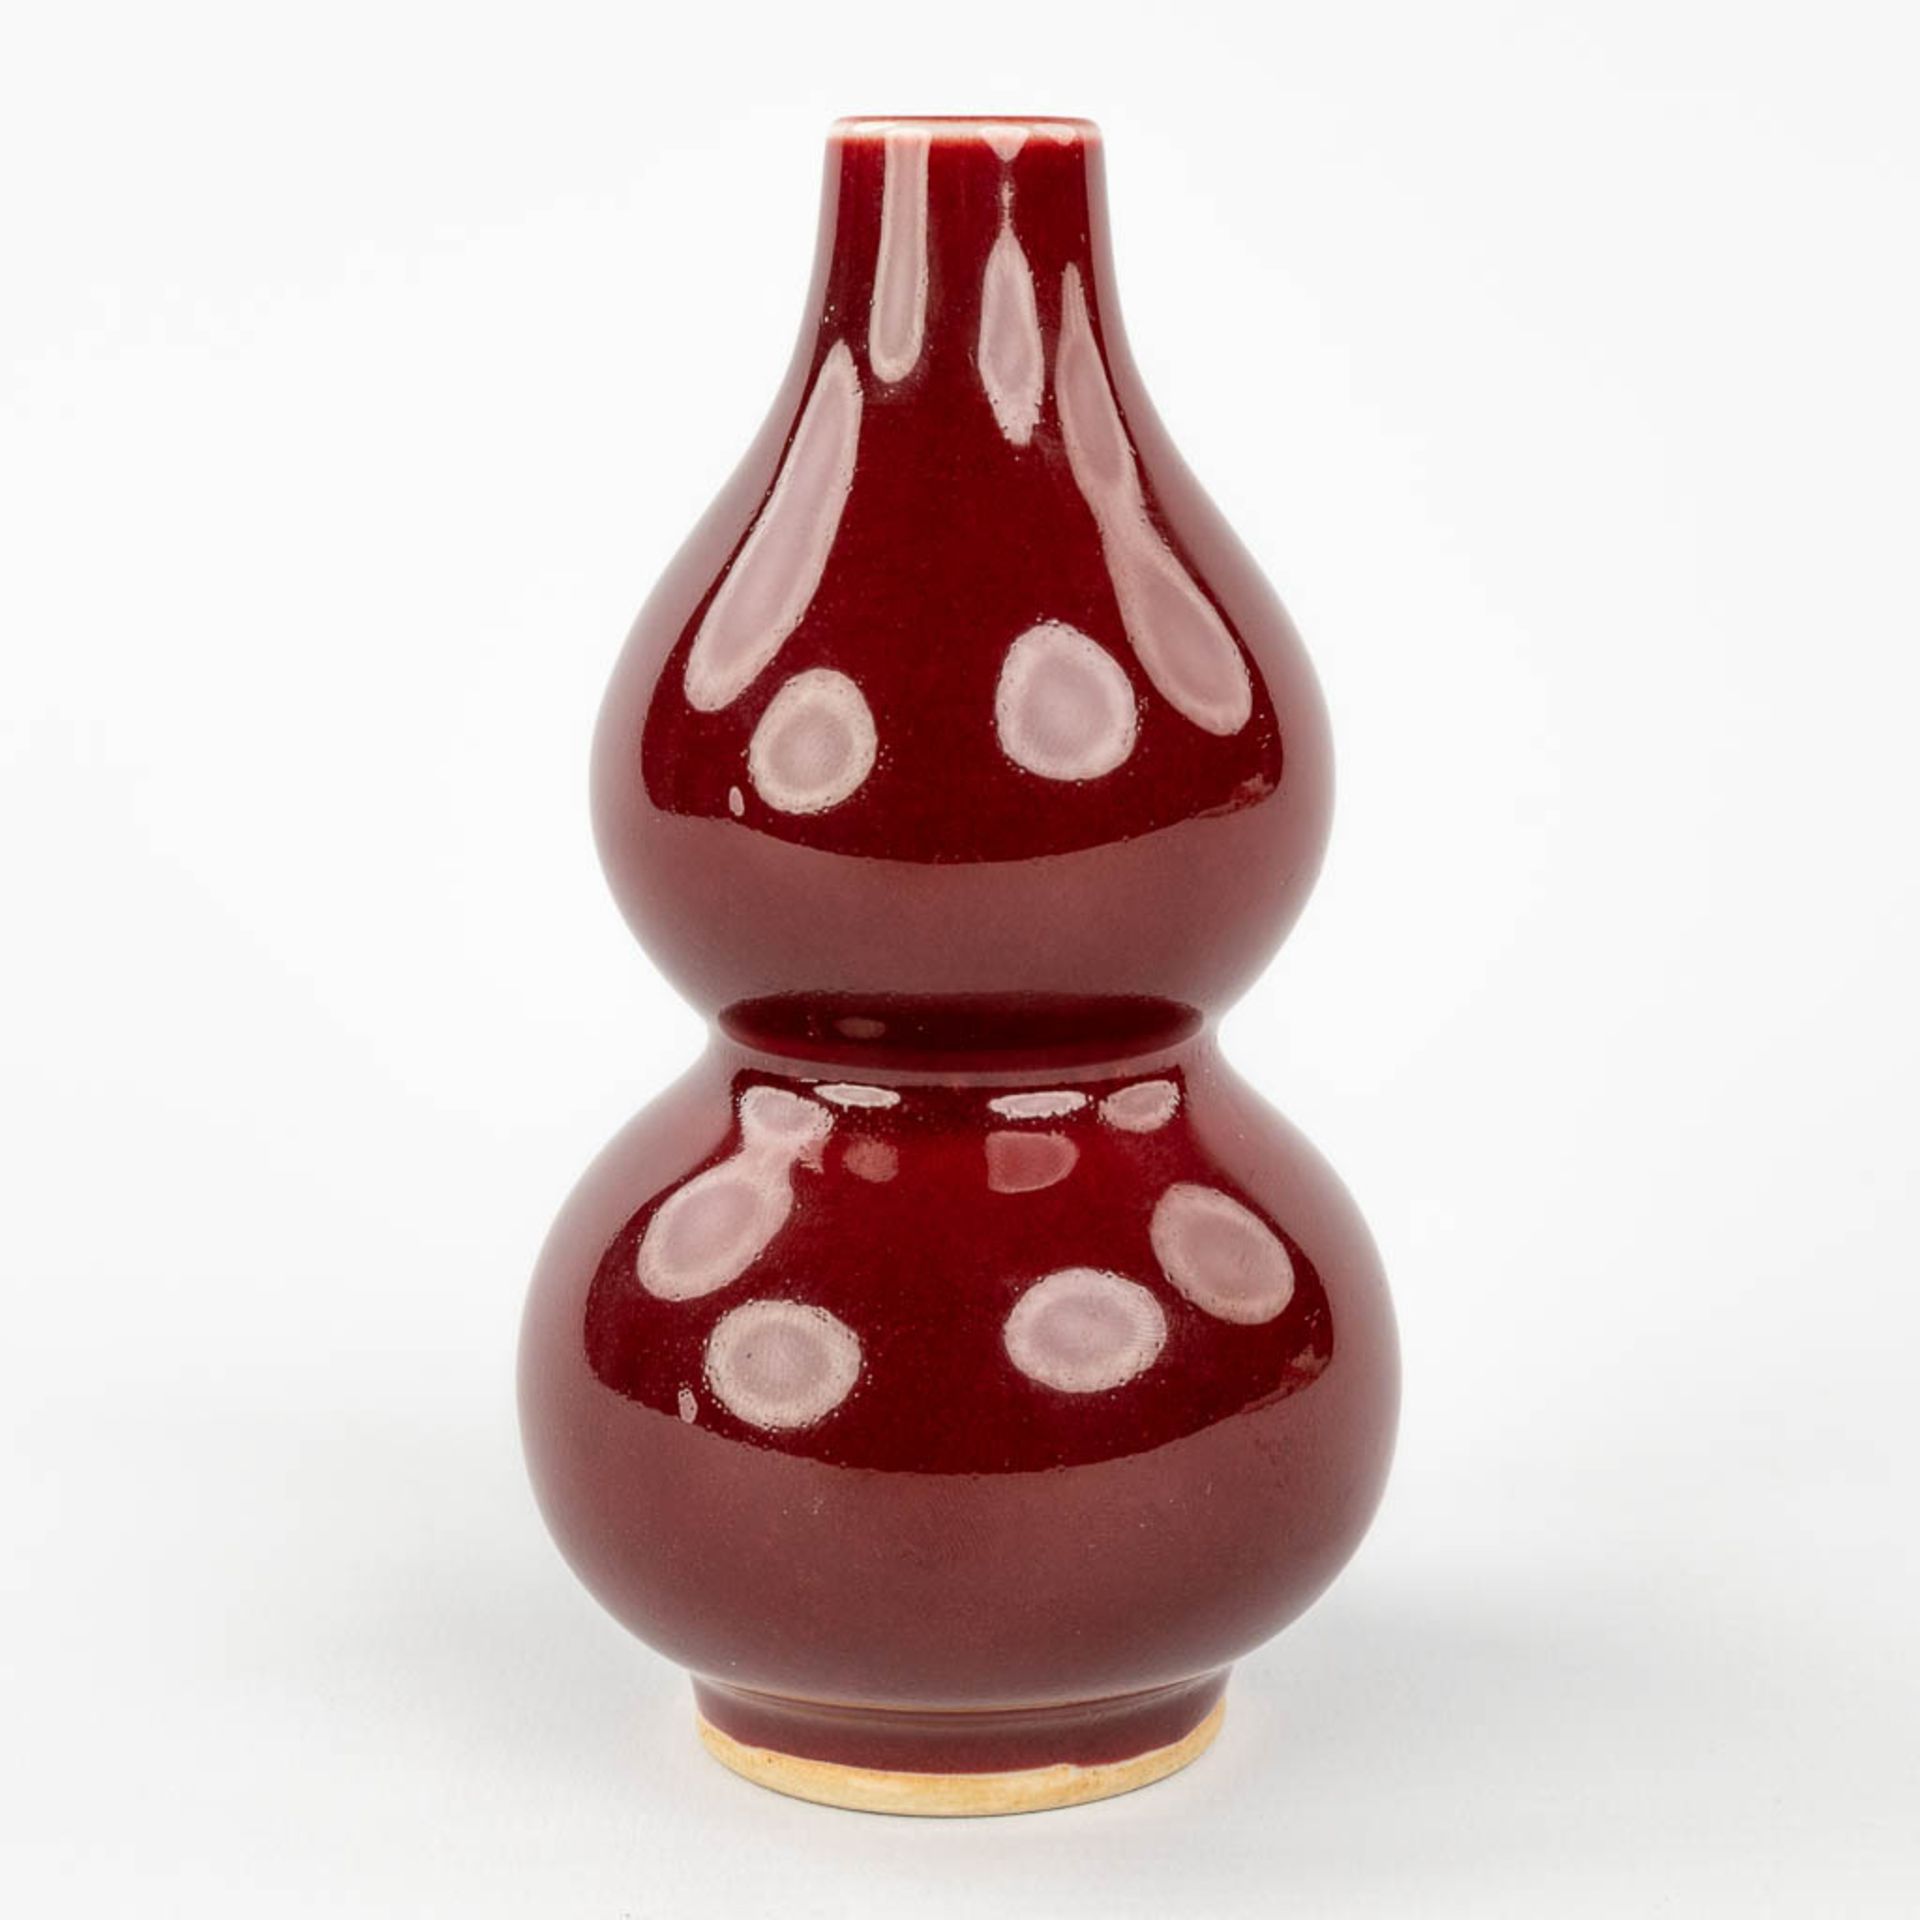 A Chinese double gourd vase, Sang De Boeuf glaze, 19th/20th century. (H: 13 x D: 7,5 cm) - Image 4 of 8